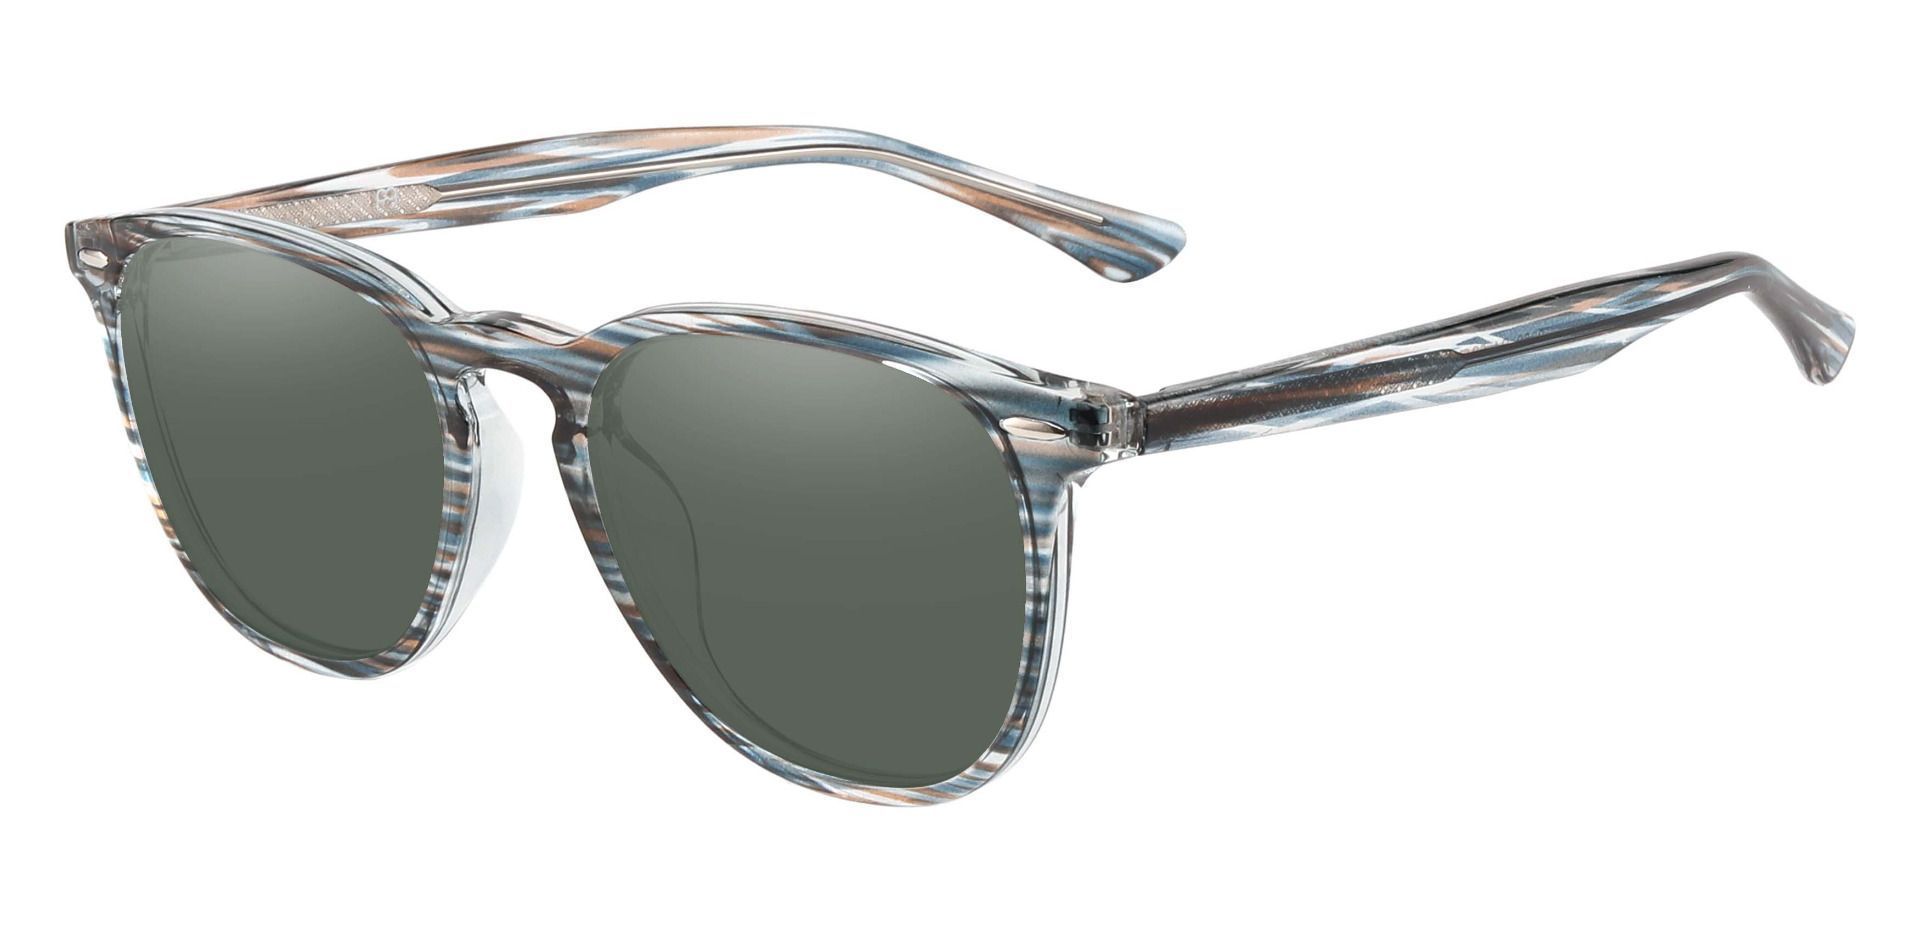 Sycamore Oval Non-Rx Sunglasses - Blue Frame With Green Lenses